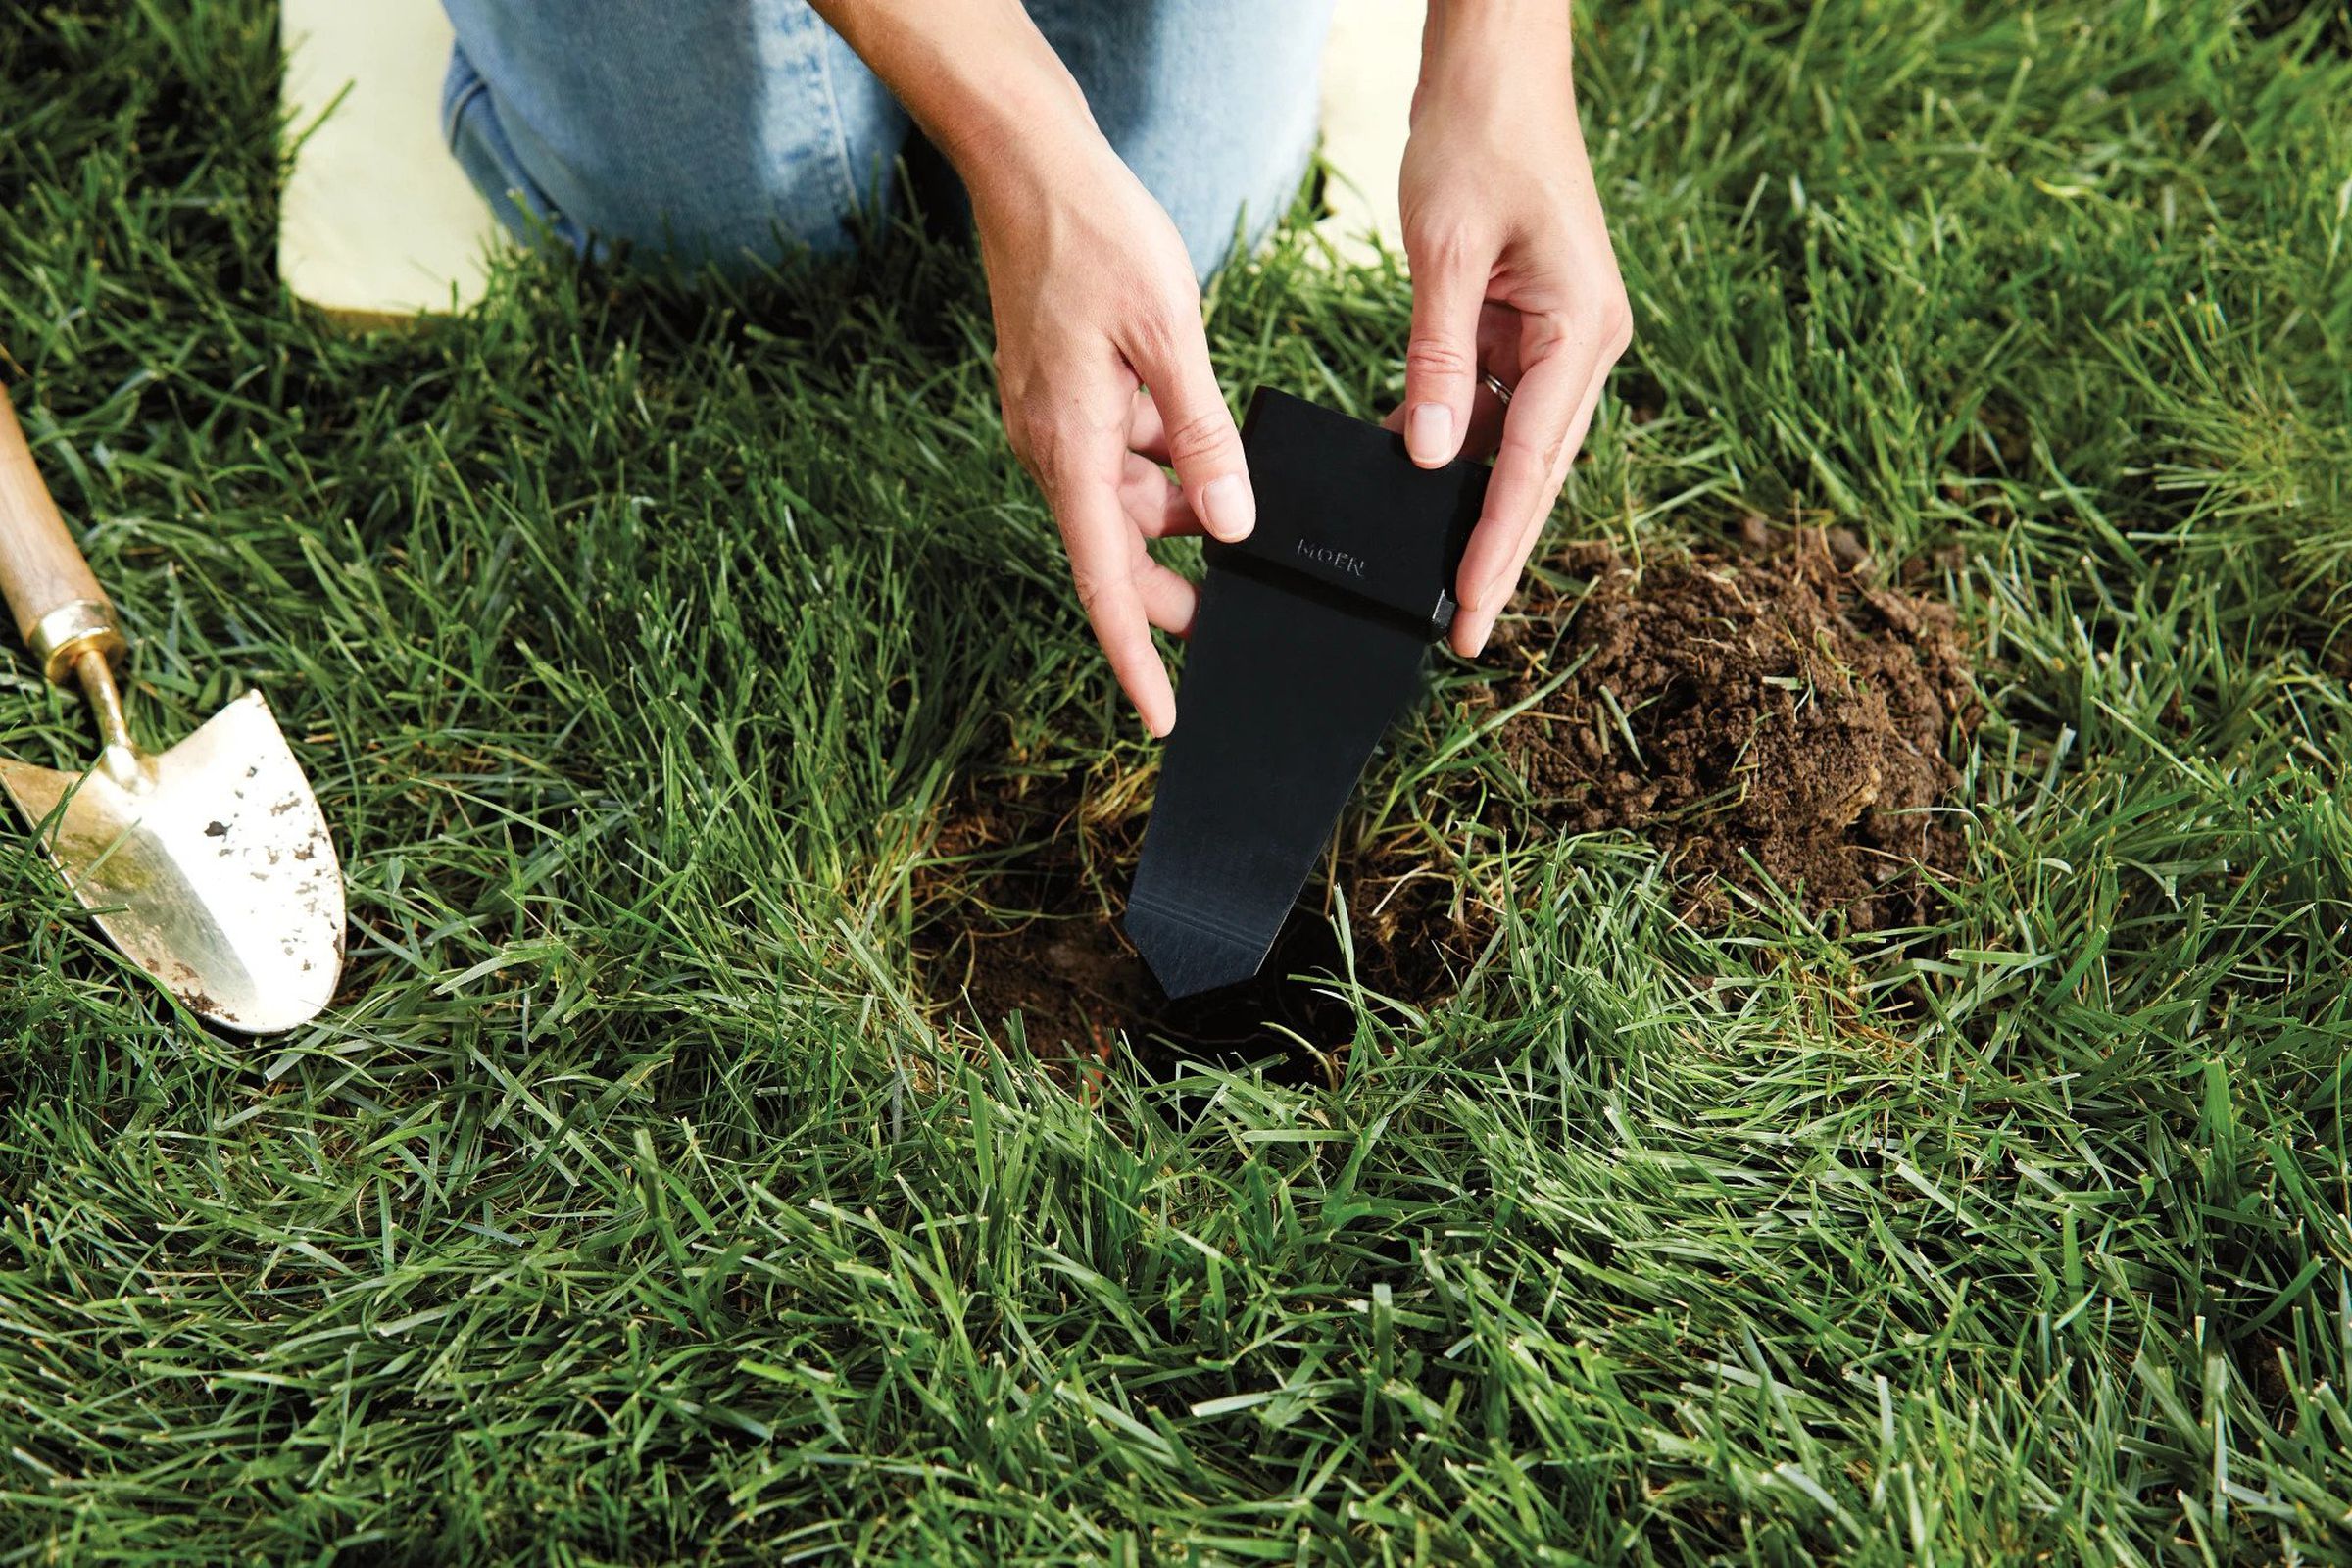 The Moen Smart Wireless Soil Sensors being placed into a hole on a lawn.